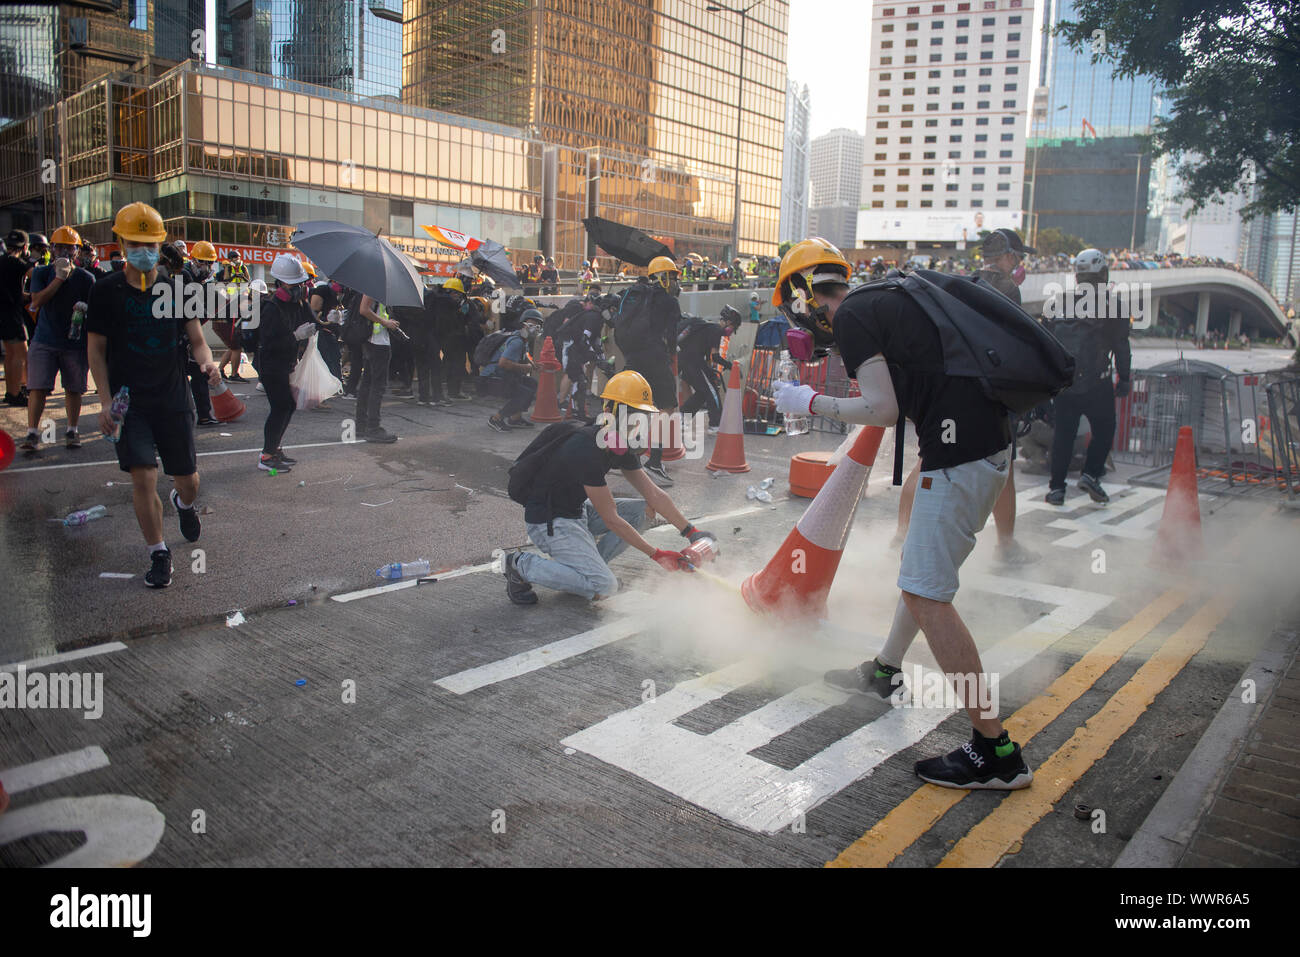 Protesters turning off tear gas bomb during protests Stock Photo